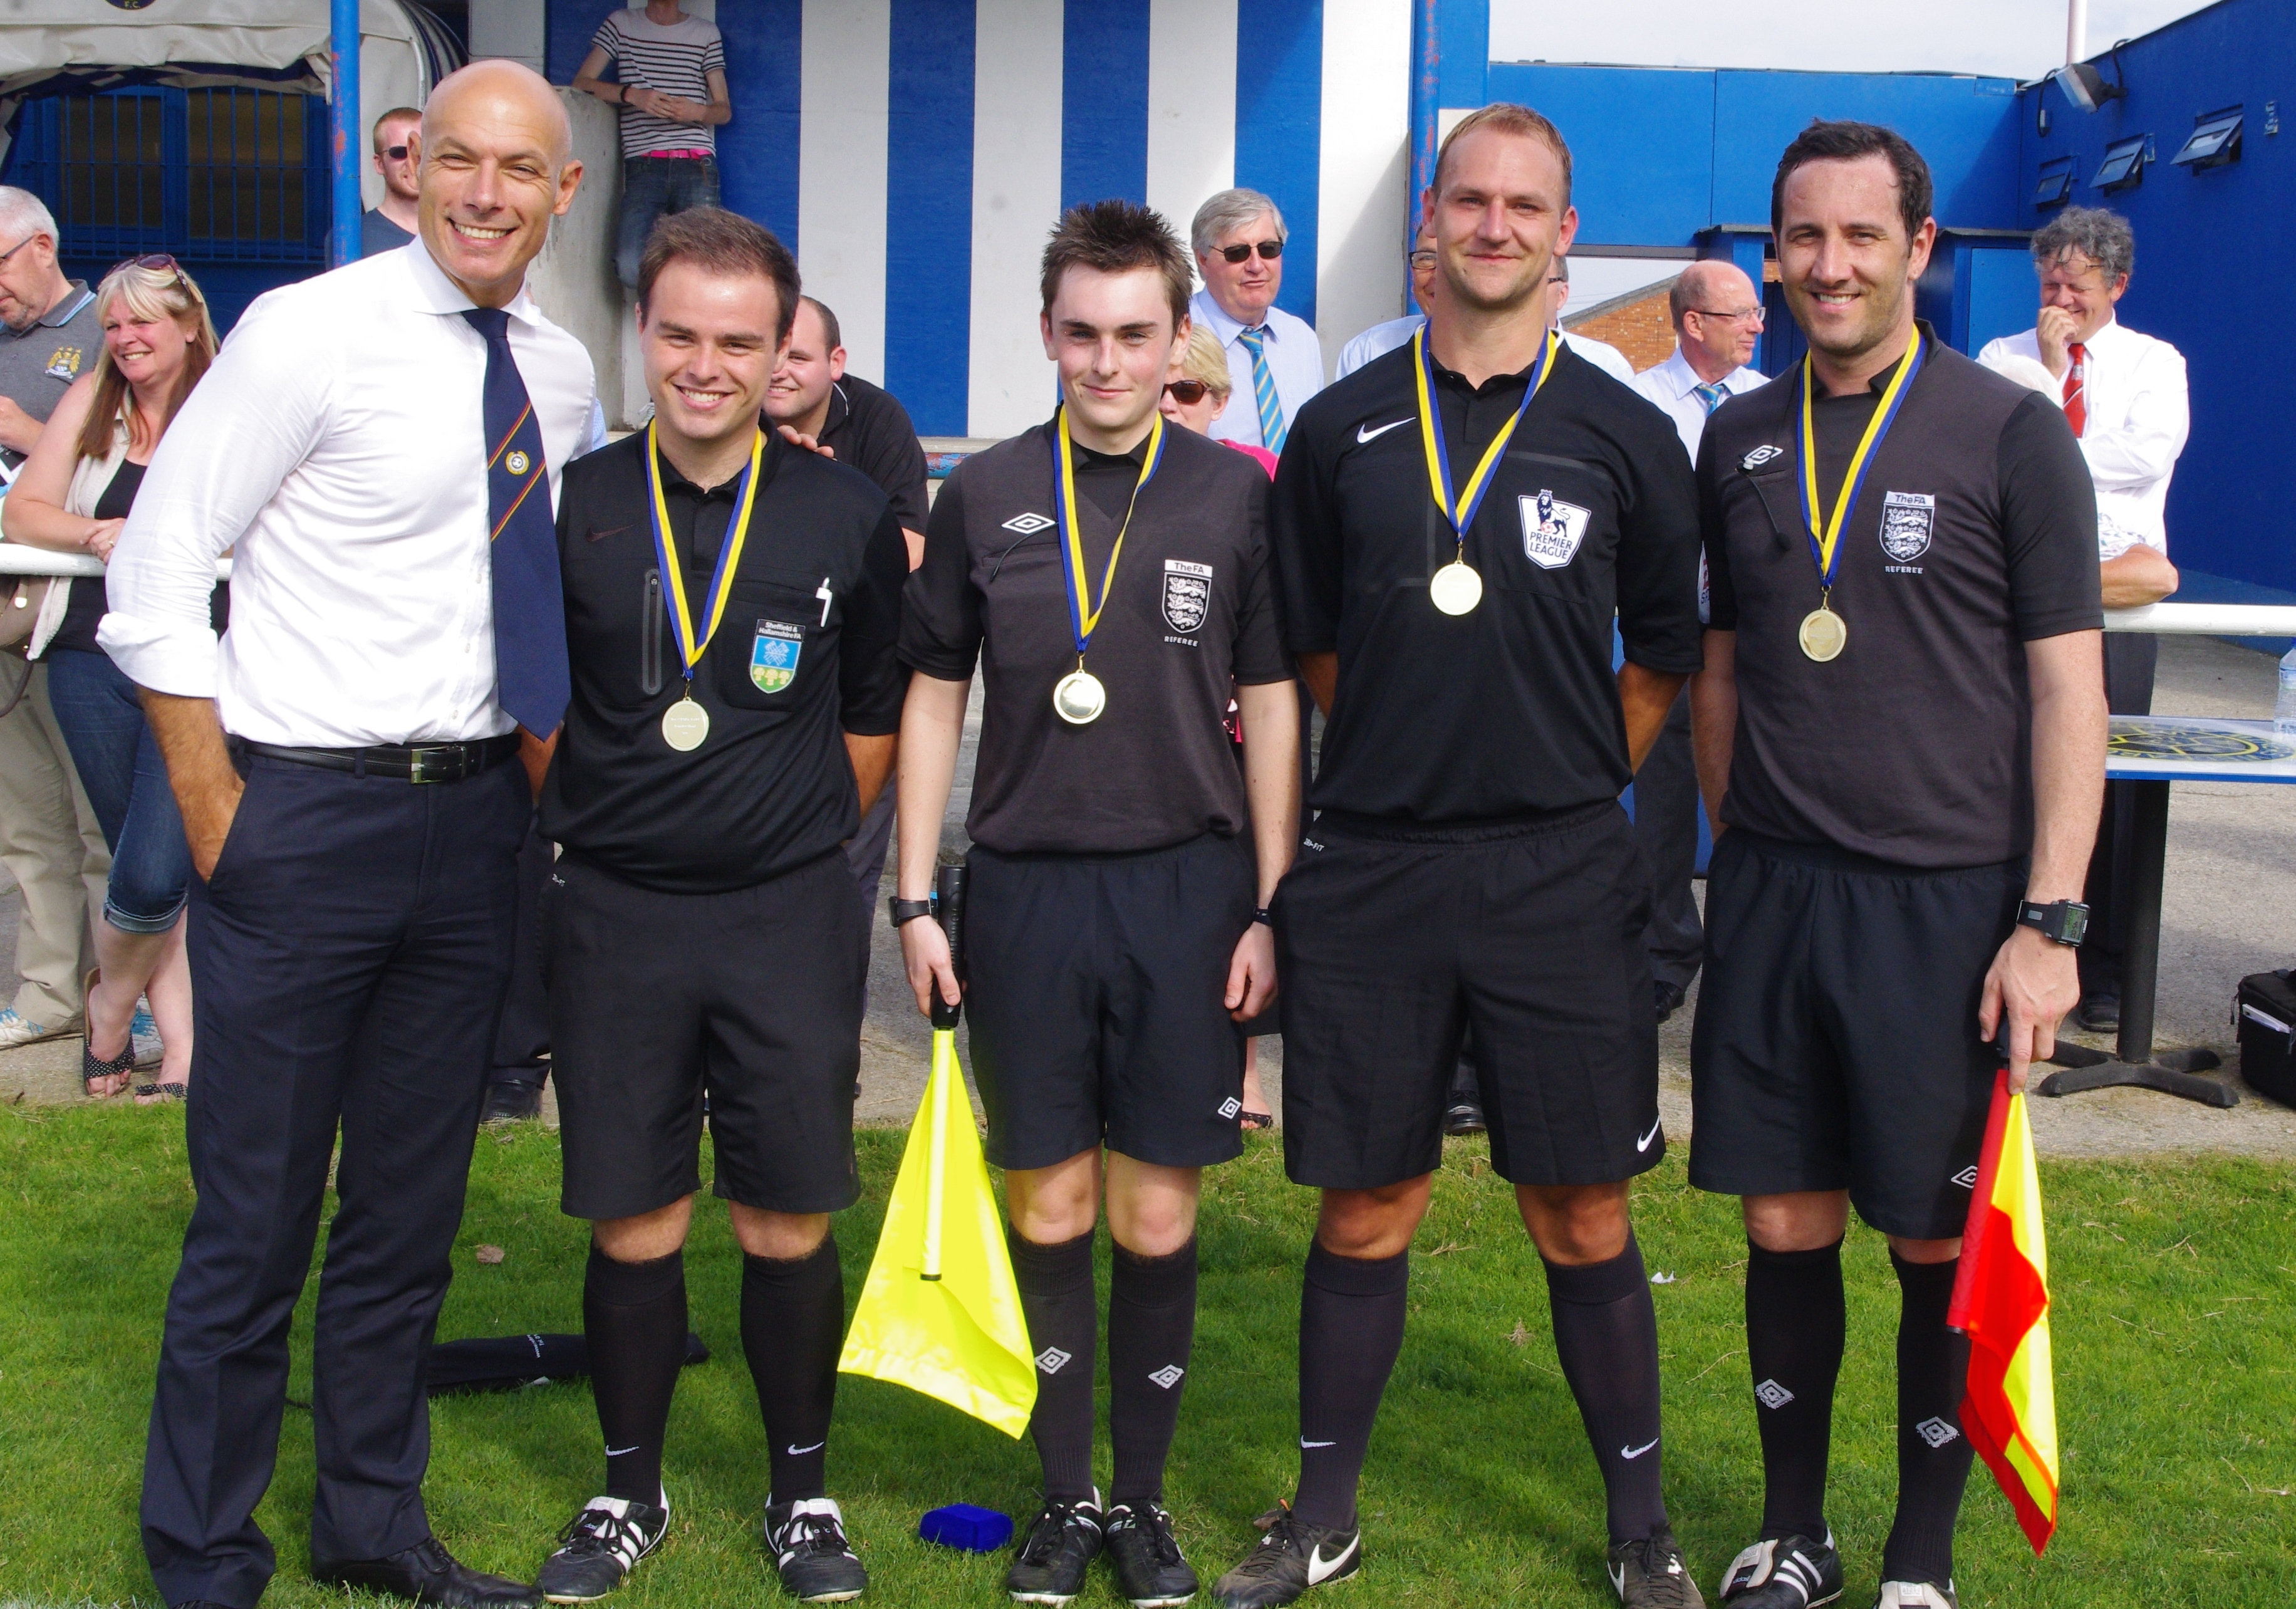 World Cup referee Howard Webb with the match officials after the game